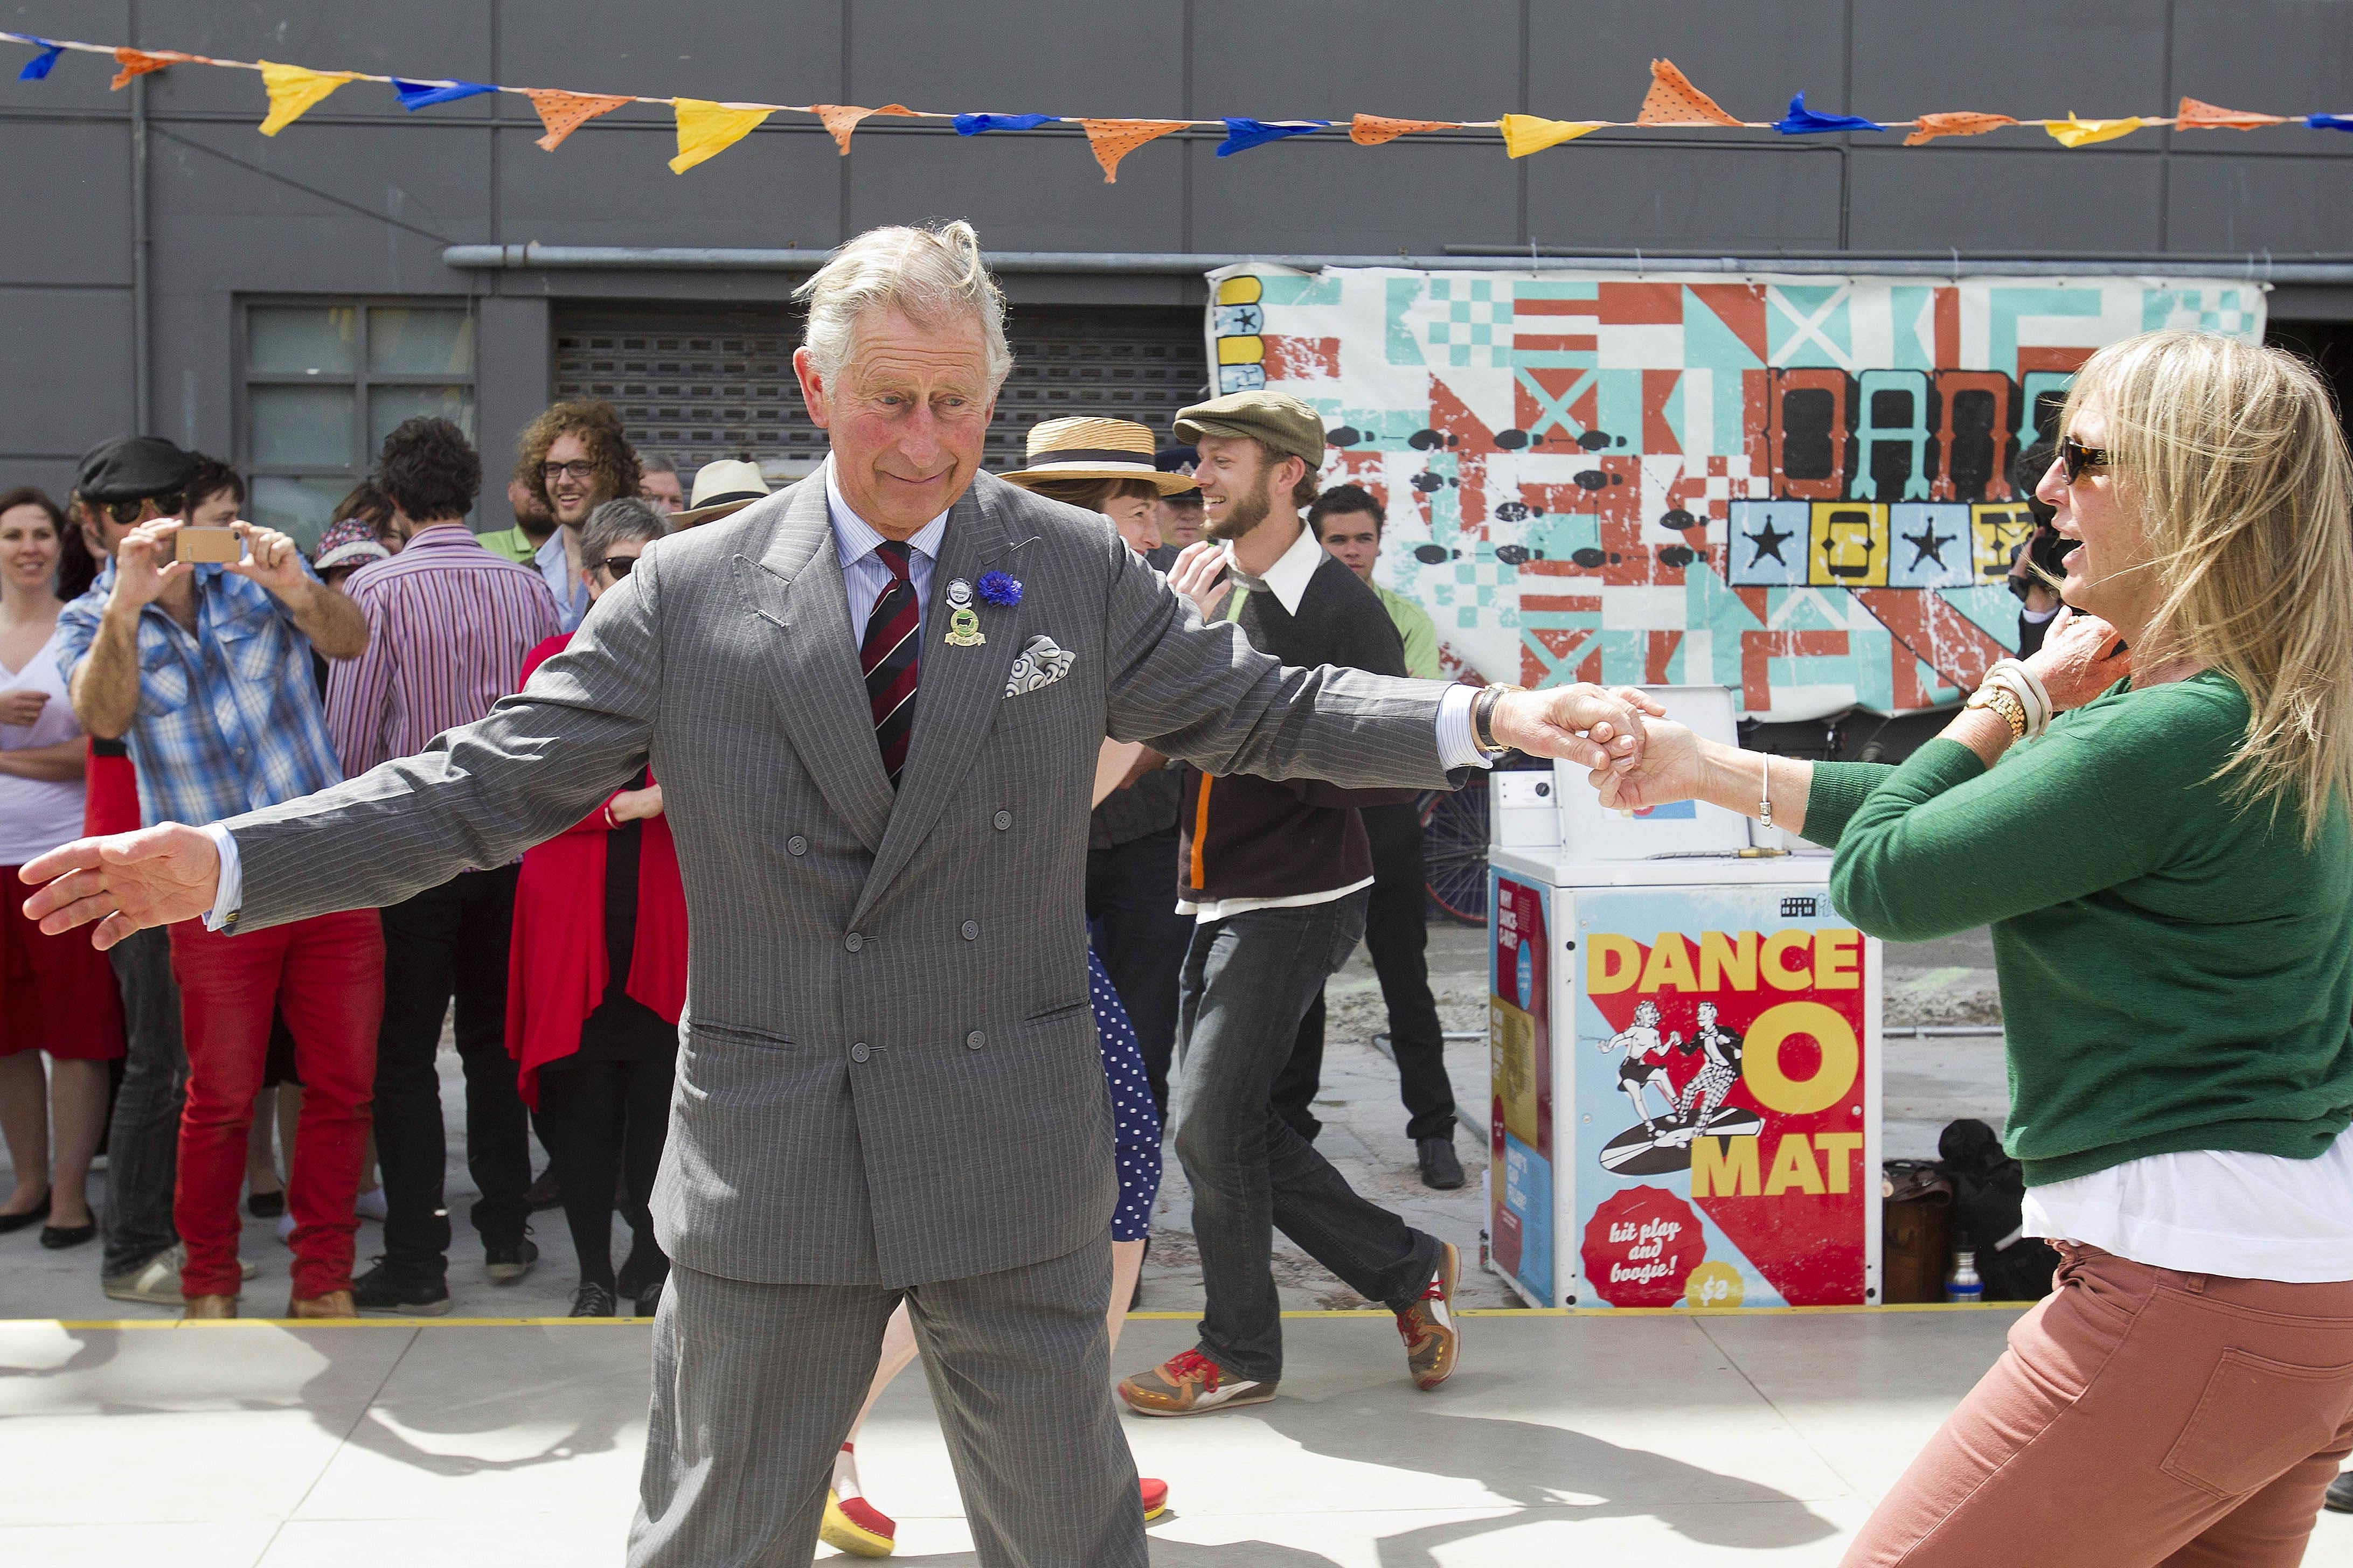 Prince Charles extends his arms while dancing in an empty lot turned civic space in Christchurch, with a crowd behind him